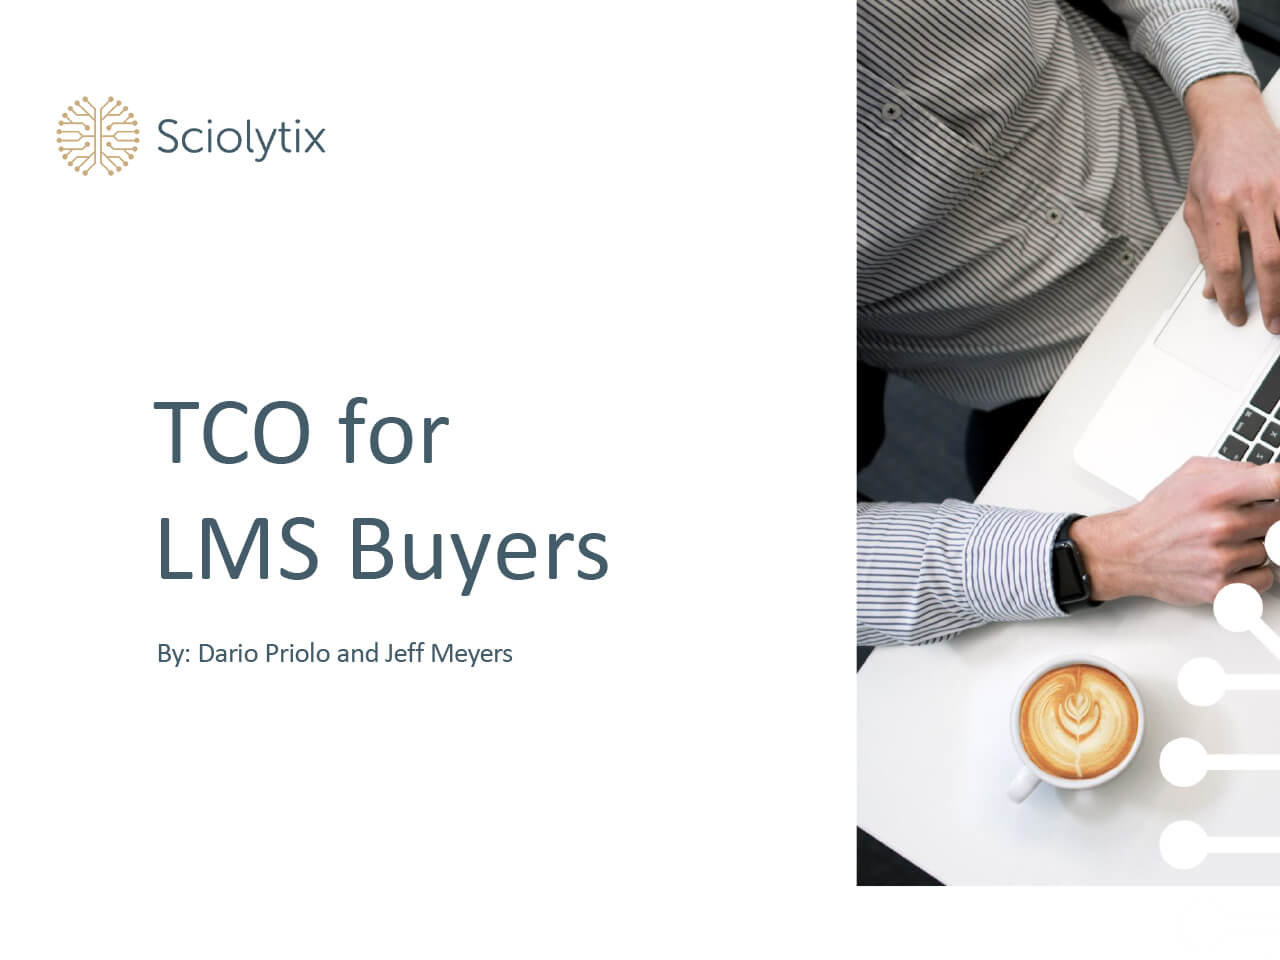 TCO (Total Cost of Ownership) for LMS Buyers